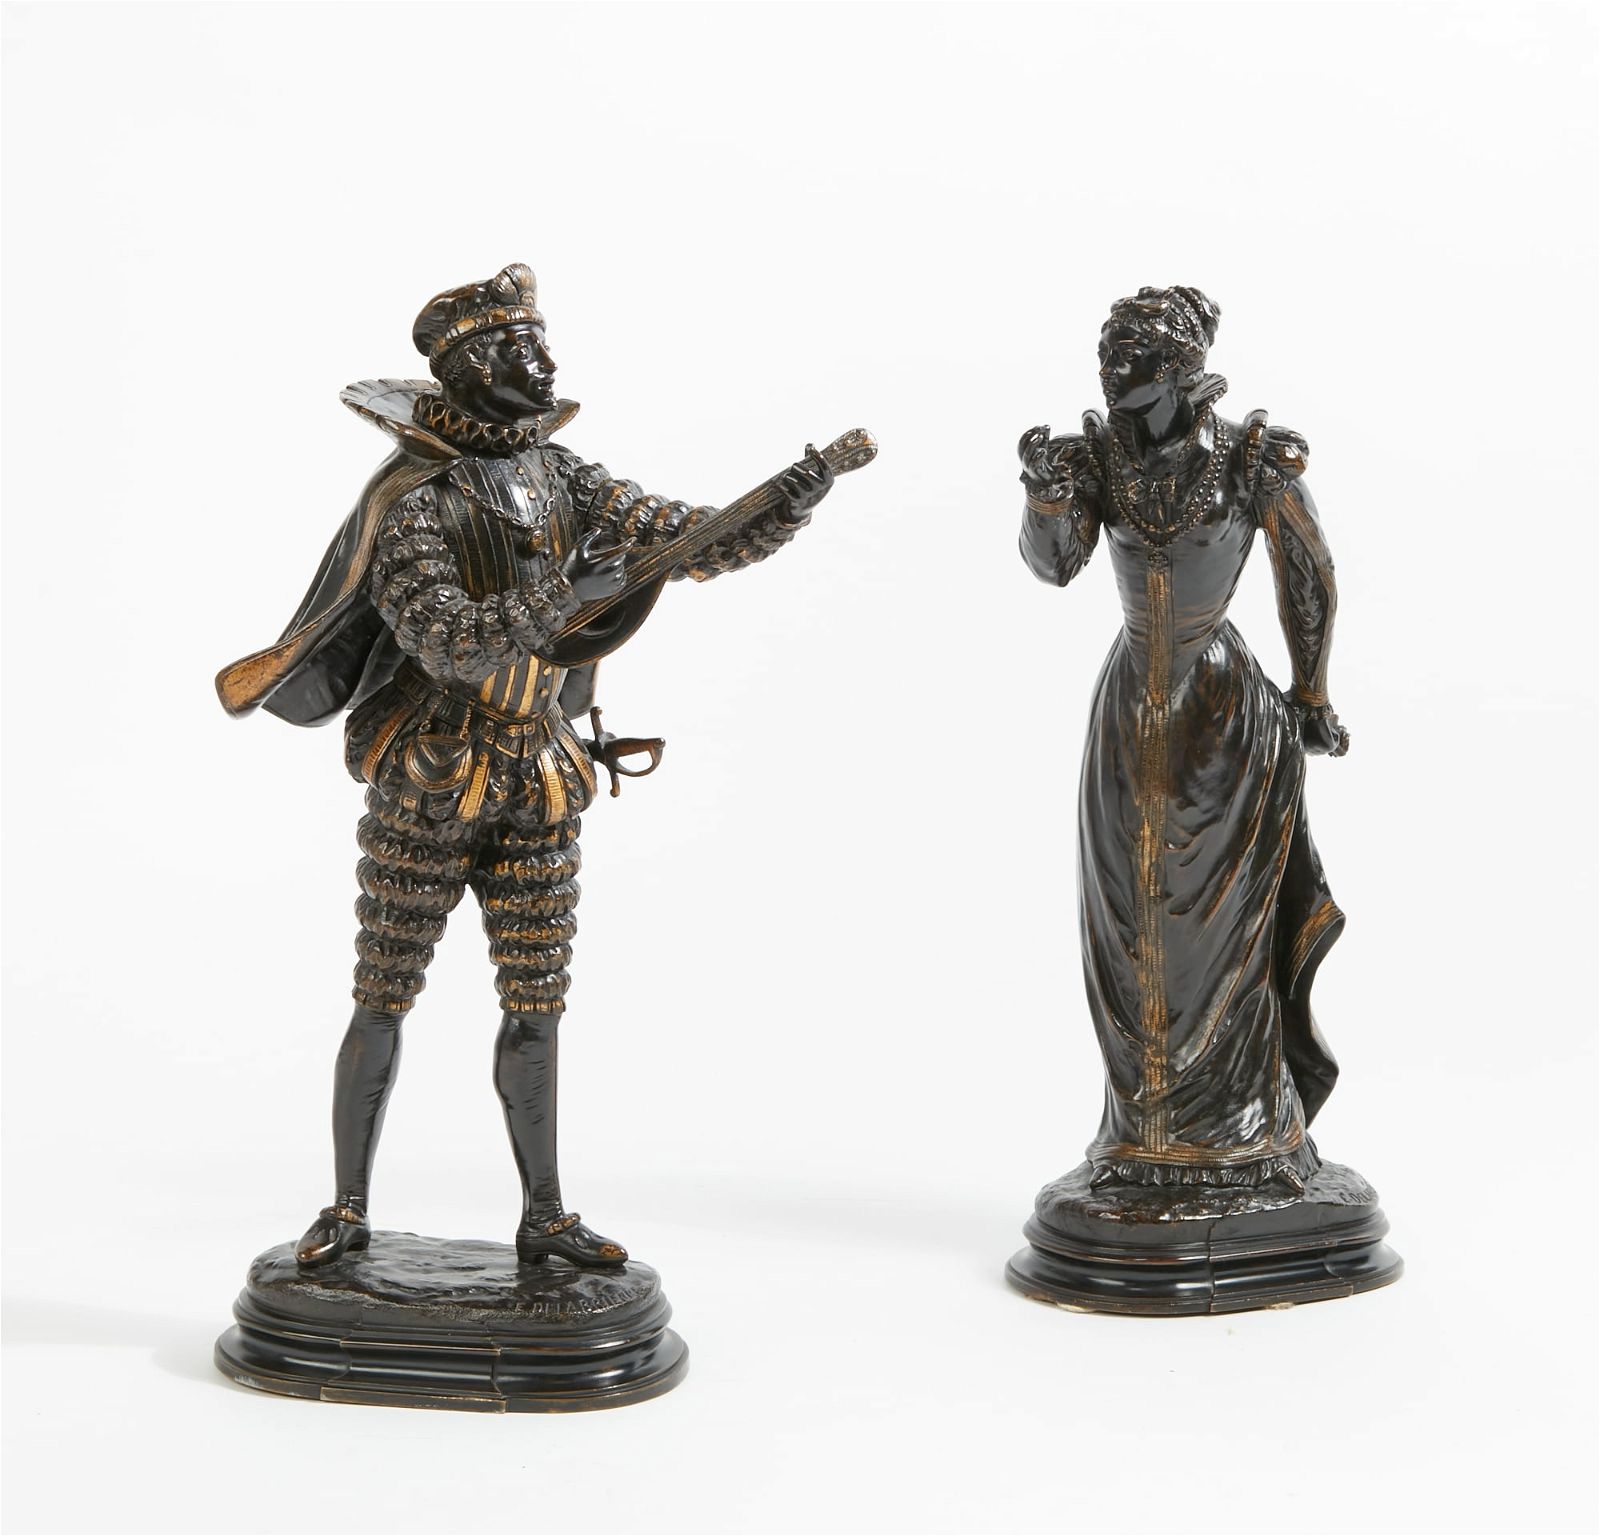 A PAIR OF FRENCH MODELS OF A MUSICIAN 2fb378b